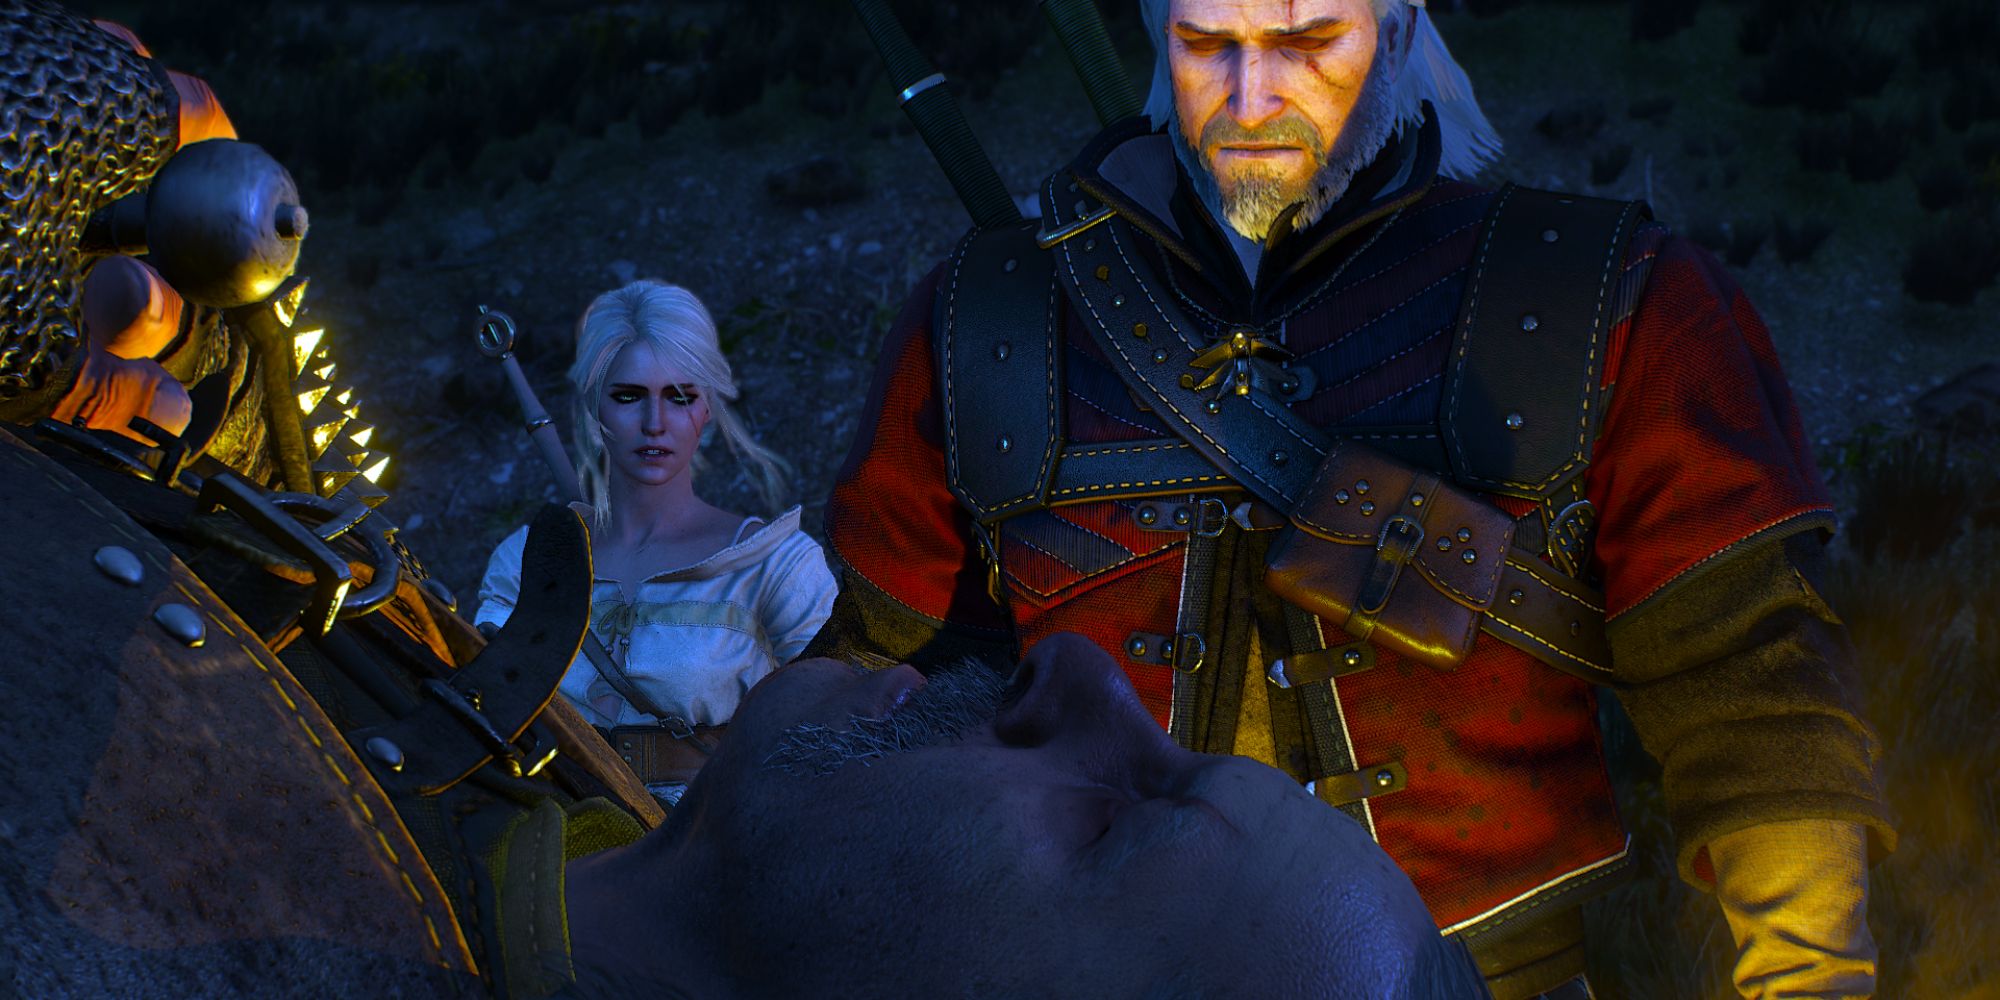 The Witcher 3 Screenshot Of Geralt and Ciri At Vesemir's Funeral